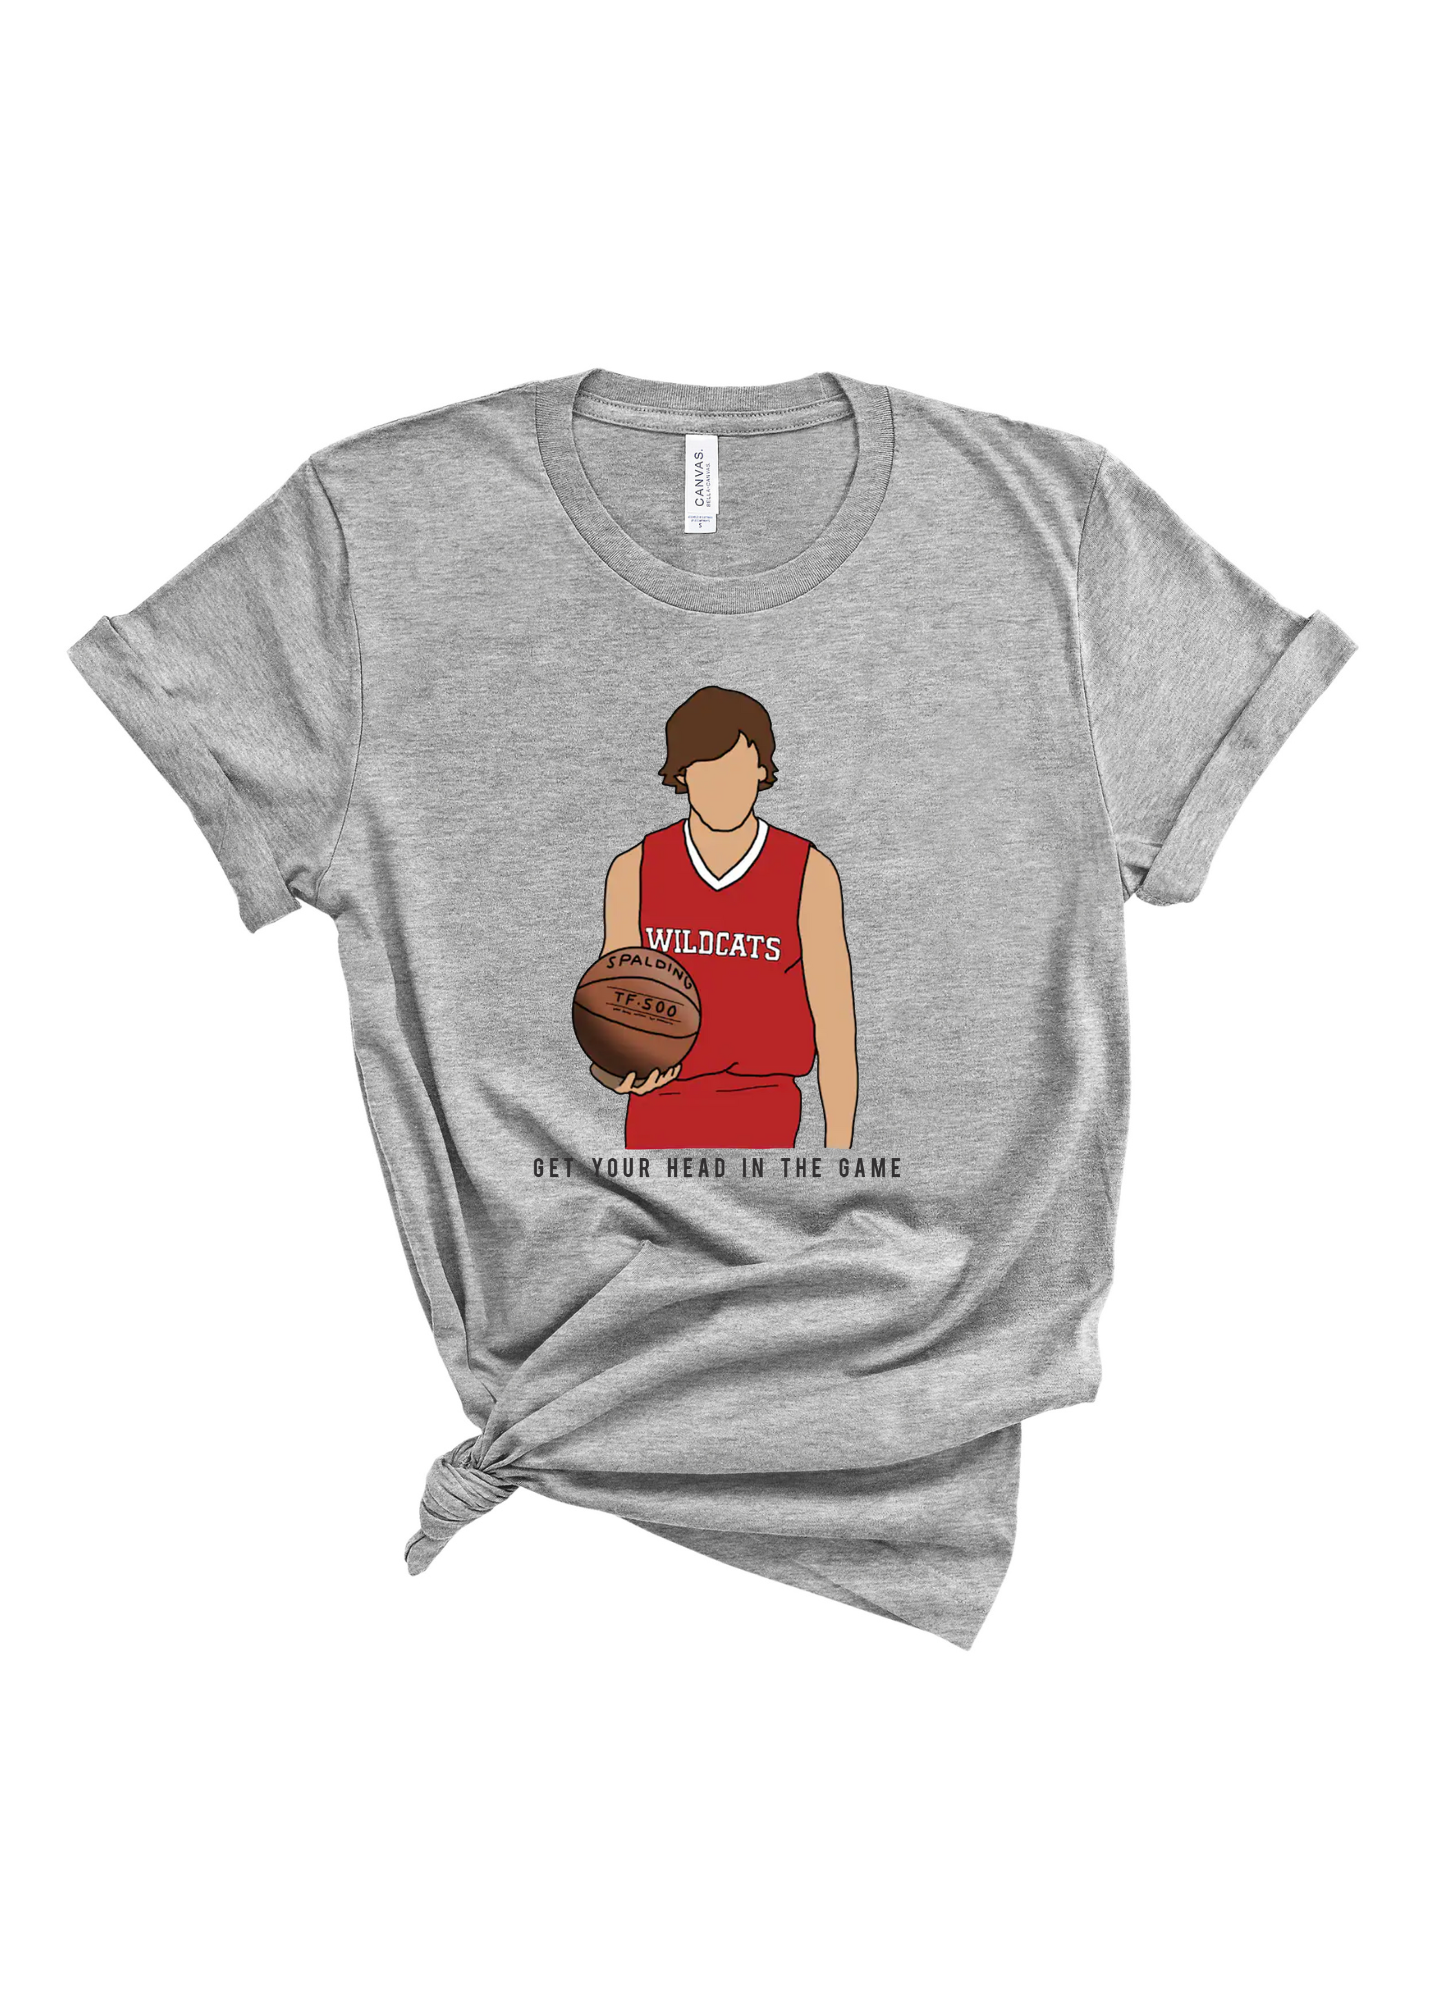 Get Your Head in the Game | Tee | Adult-Sister Shirts-Sister Shirts, Cute & Custom Tees for Mama & Littles in Trussville, Alabama.